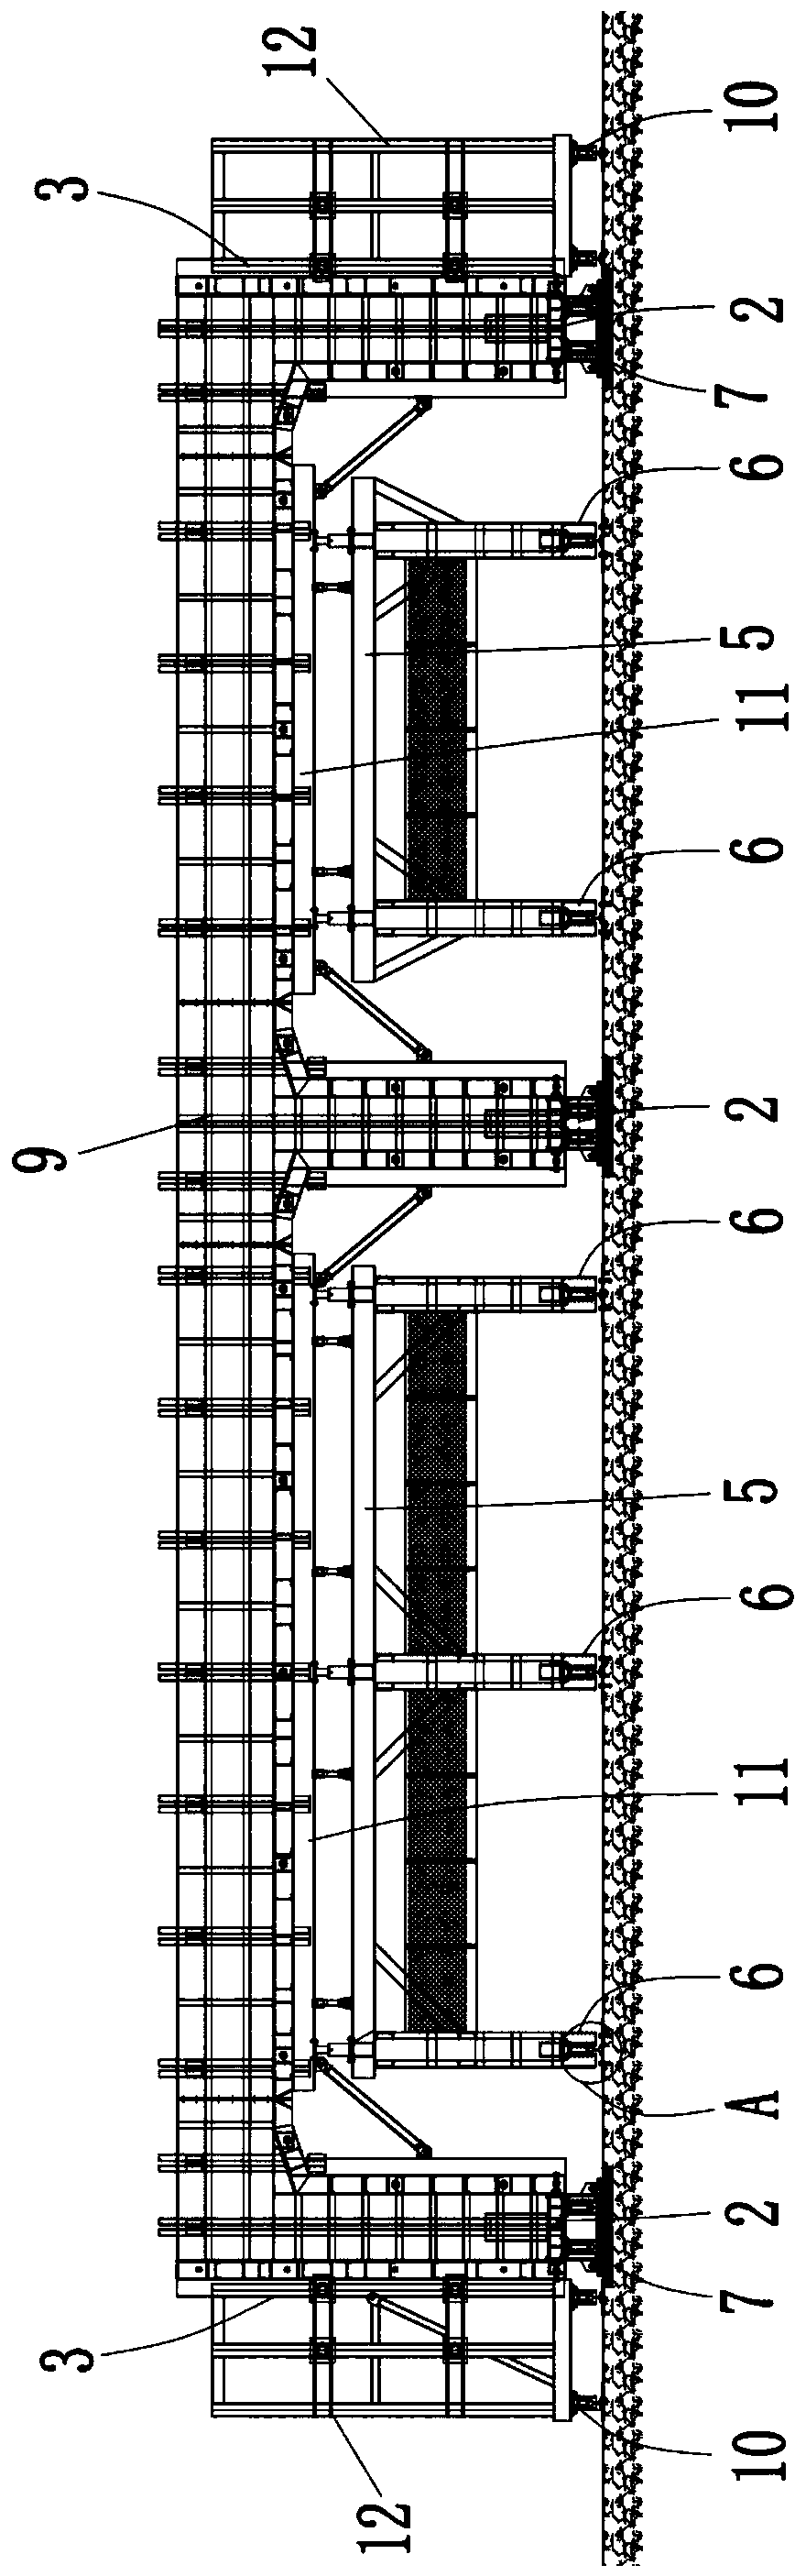 Mold suitable for producing fabricated undercrossing channel frame through long-line matching method and prefabrication method